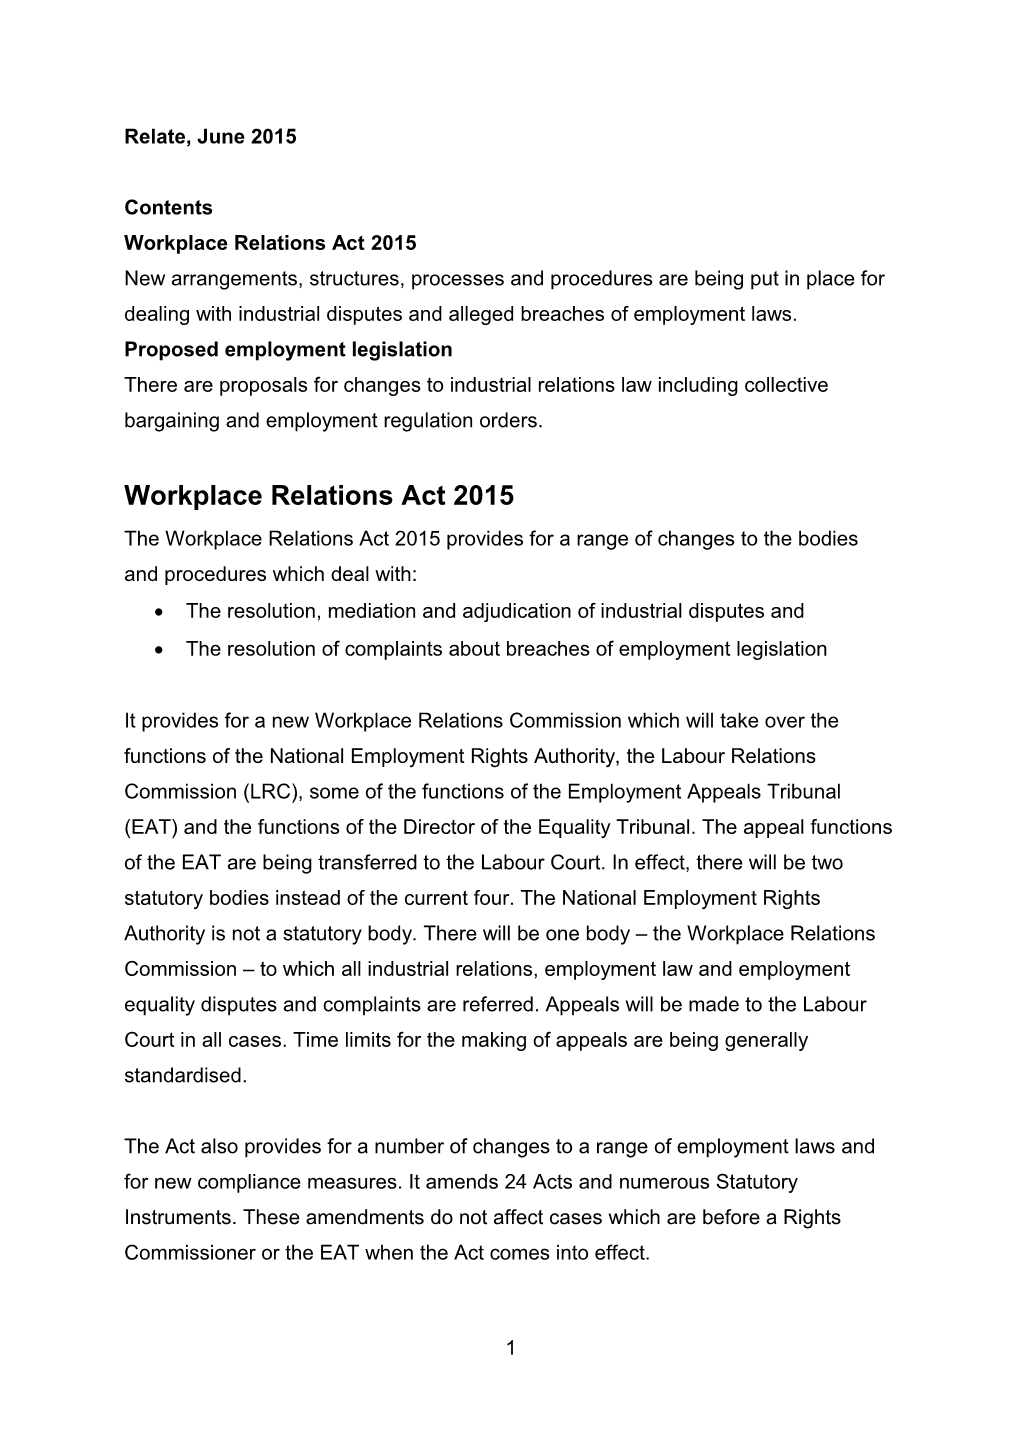 Workplace Relations Act 2015